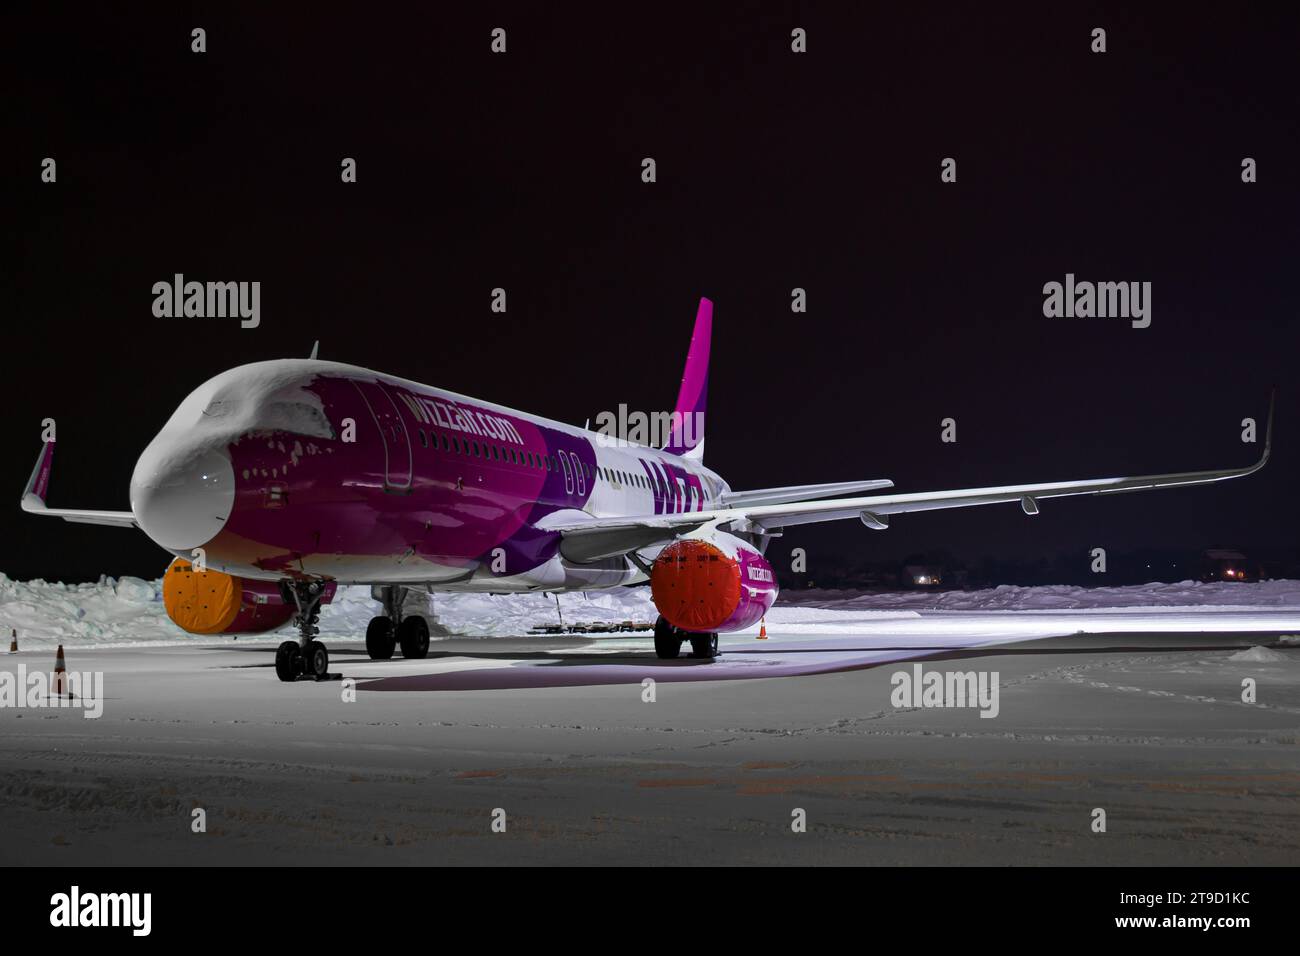 WizzAir Airbus A320 parked at the gate in Lviv, covered in snow, night photo Stock Photo